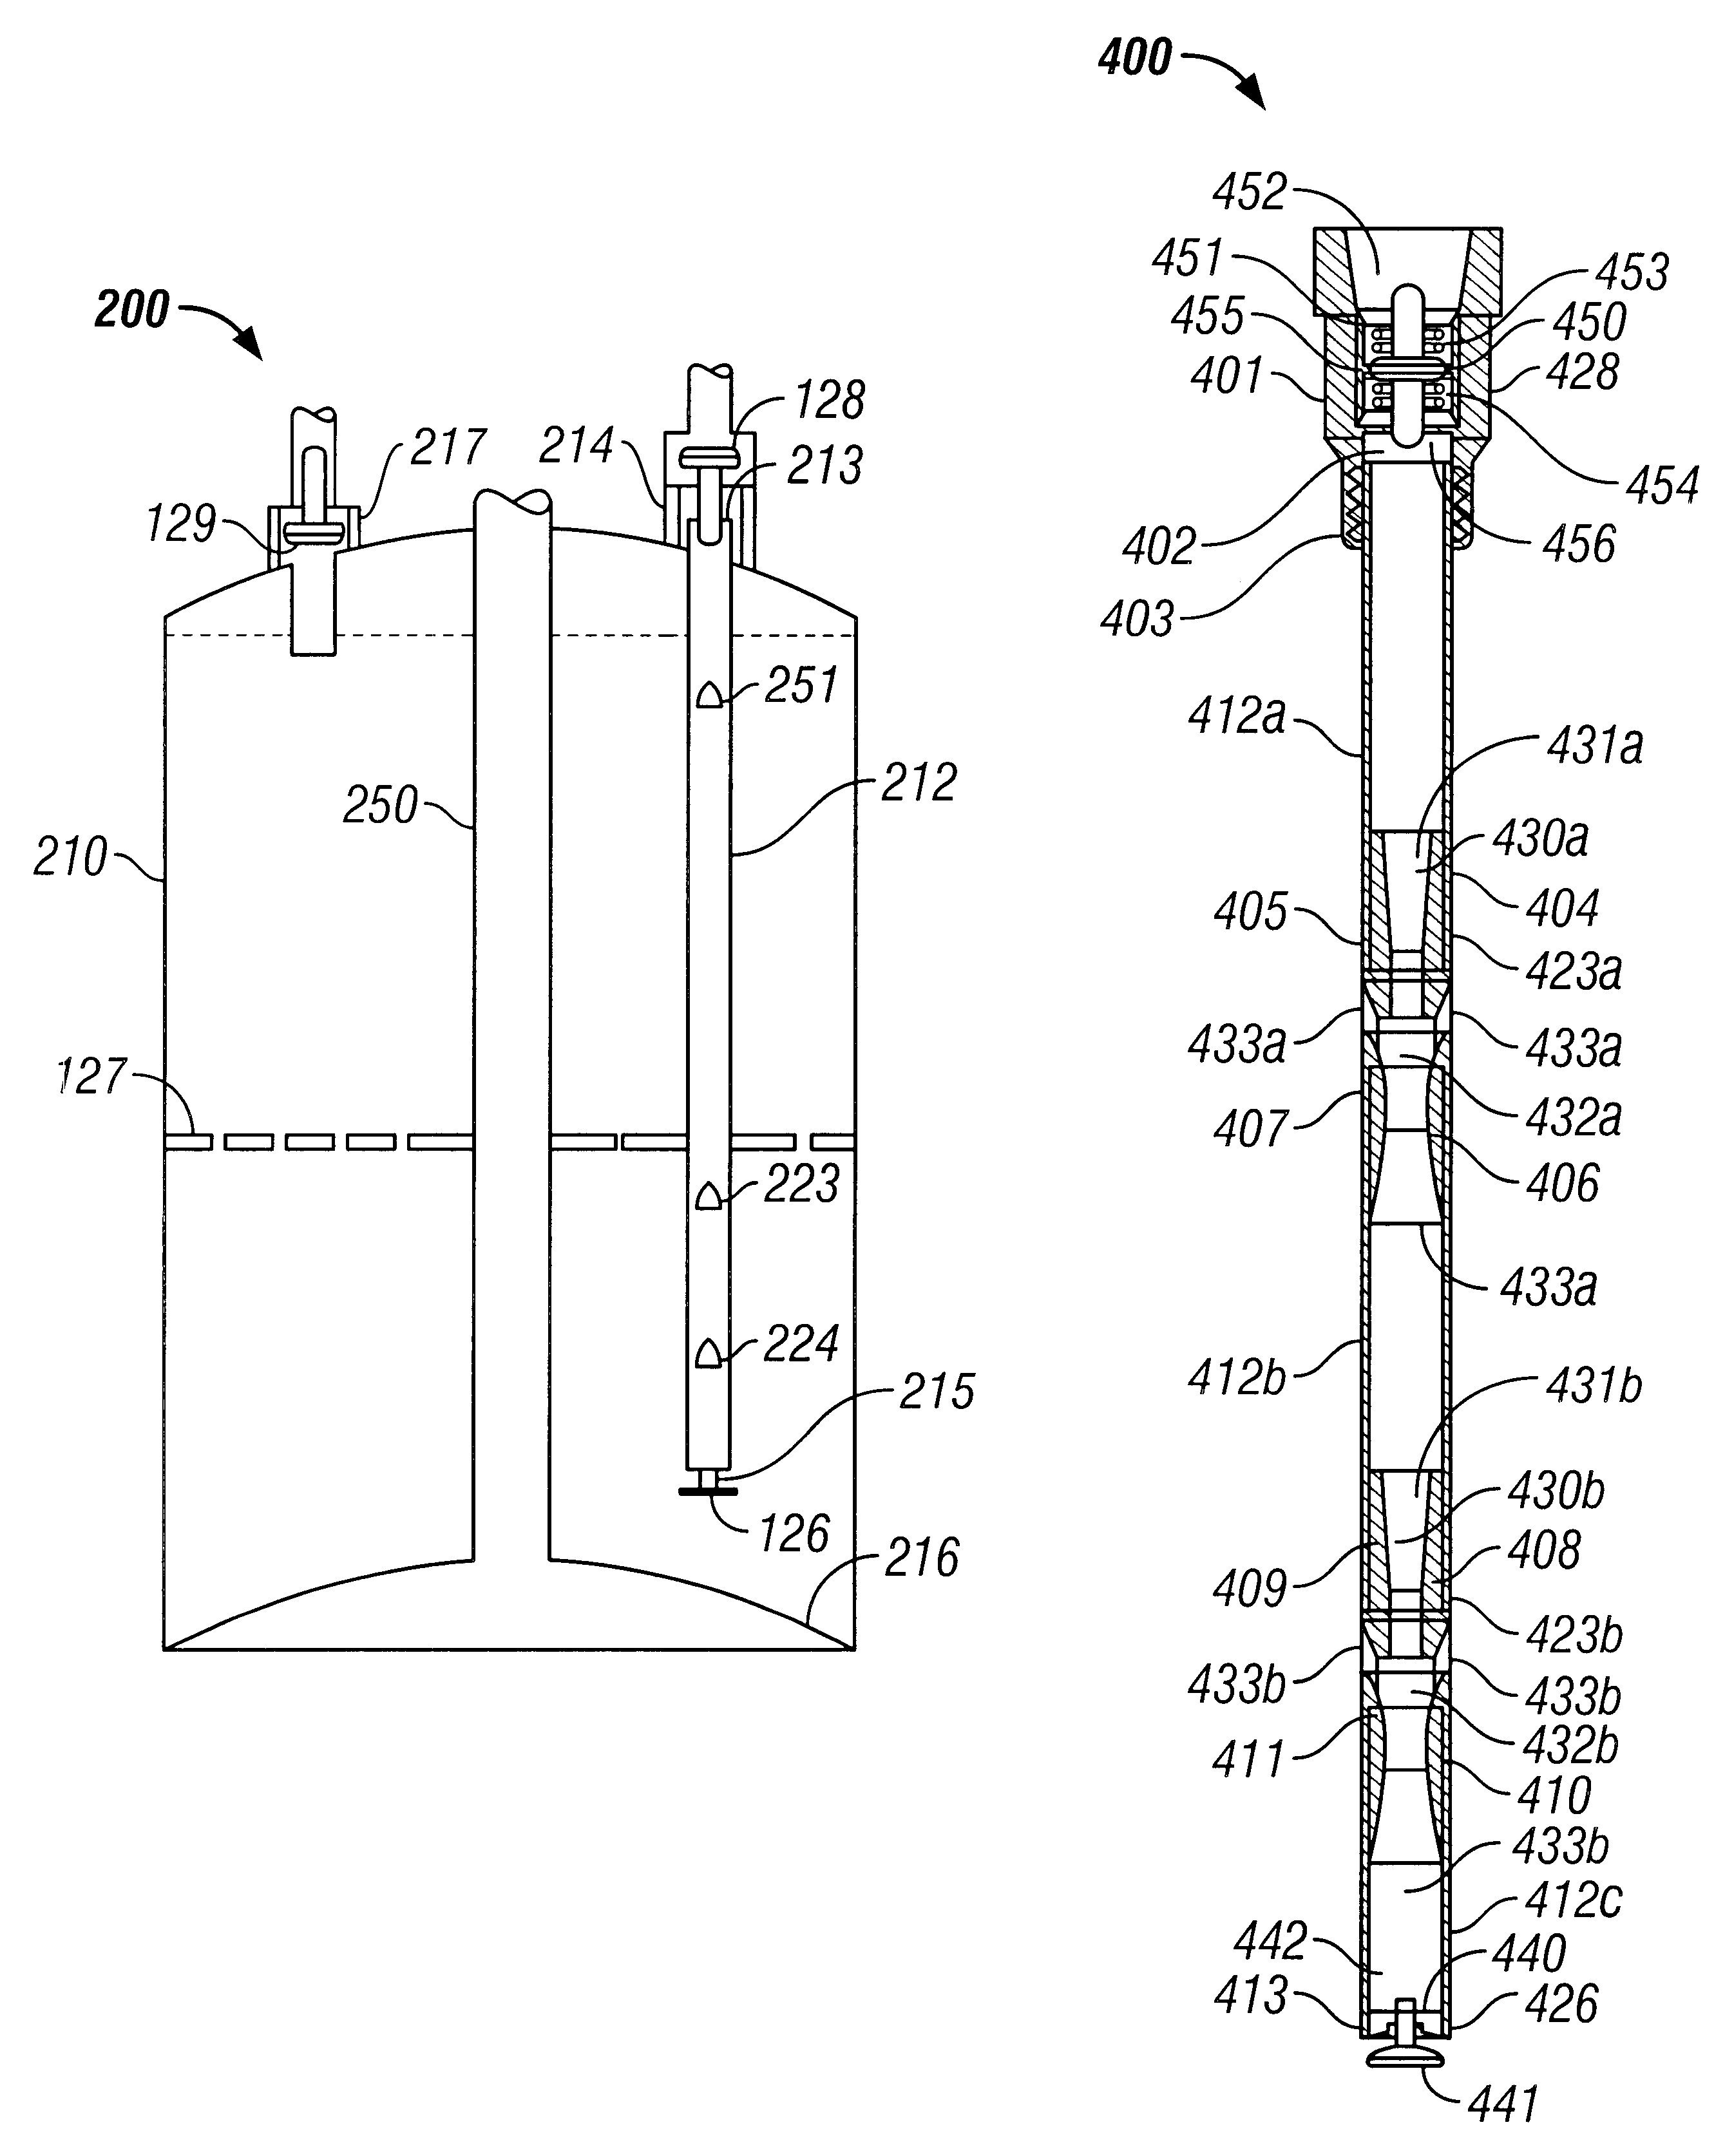 Water mixing system for water heaters